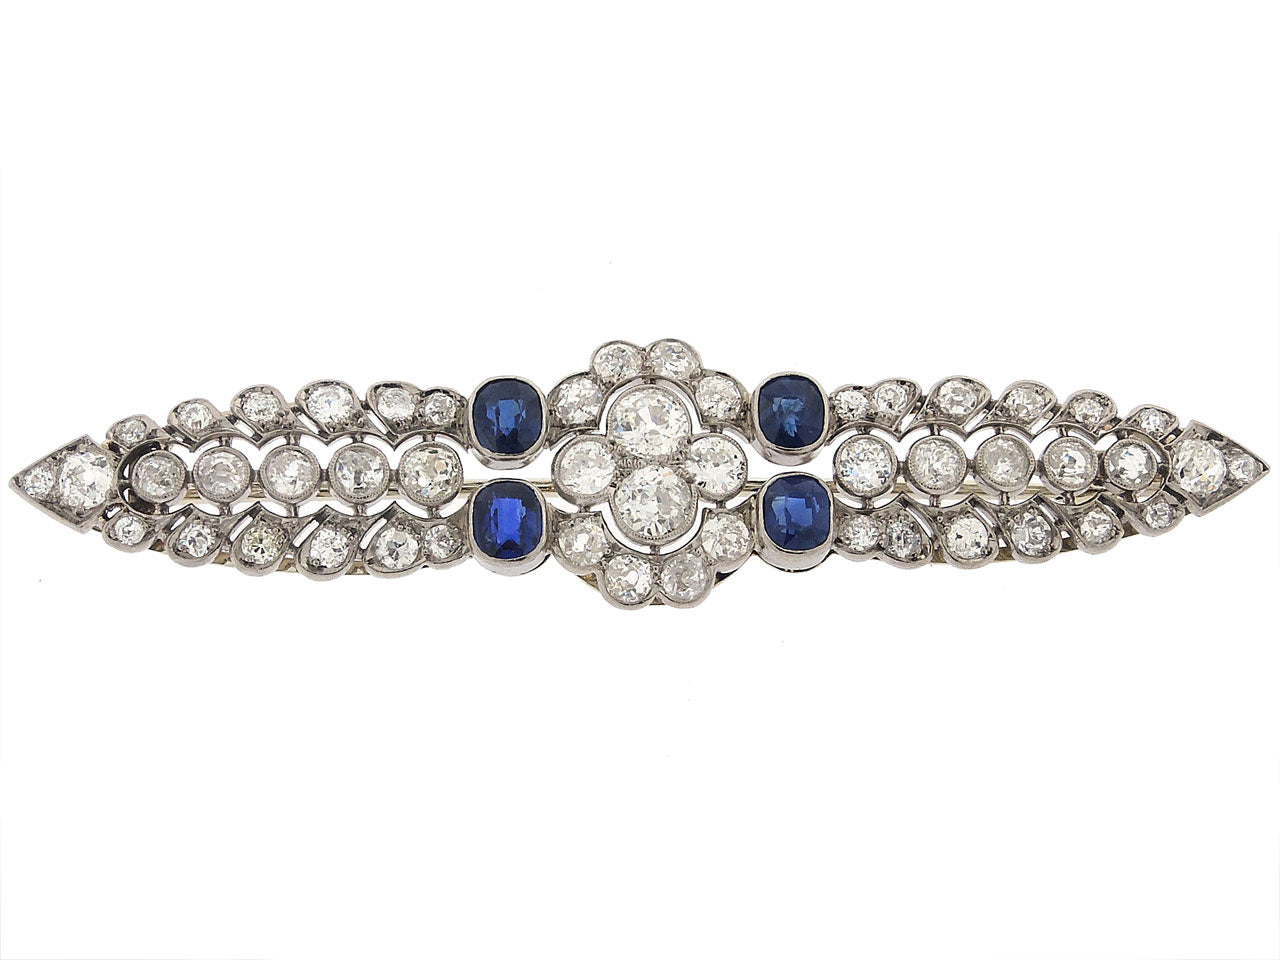 Antique Edwardian Diamond and Sapphire Wing Brooch with French Hallmarks in Platinum and 18K